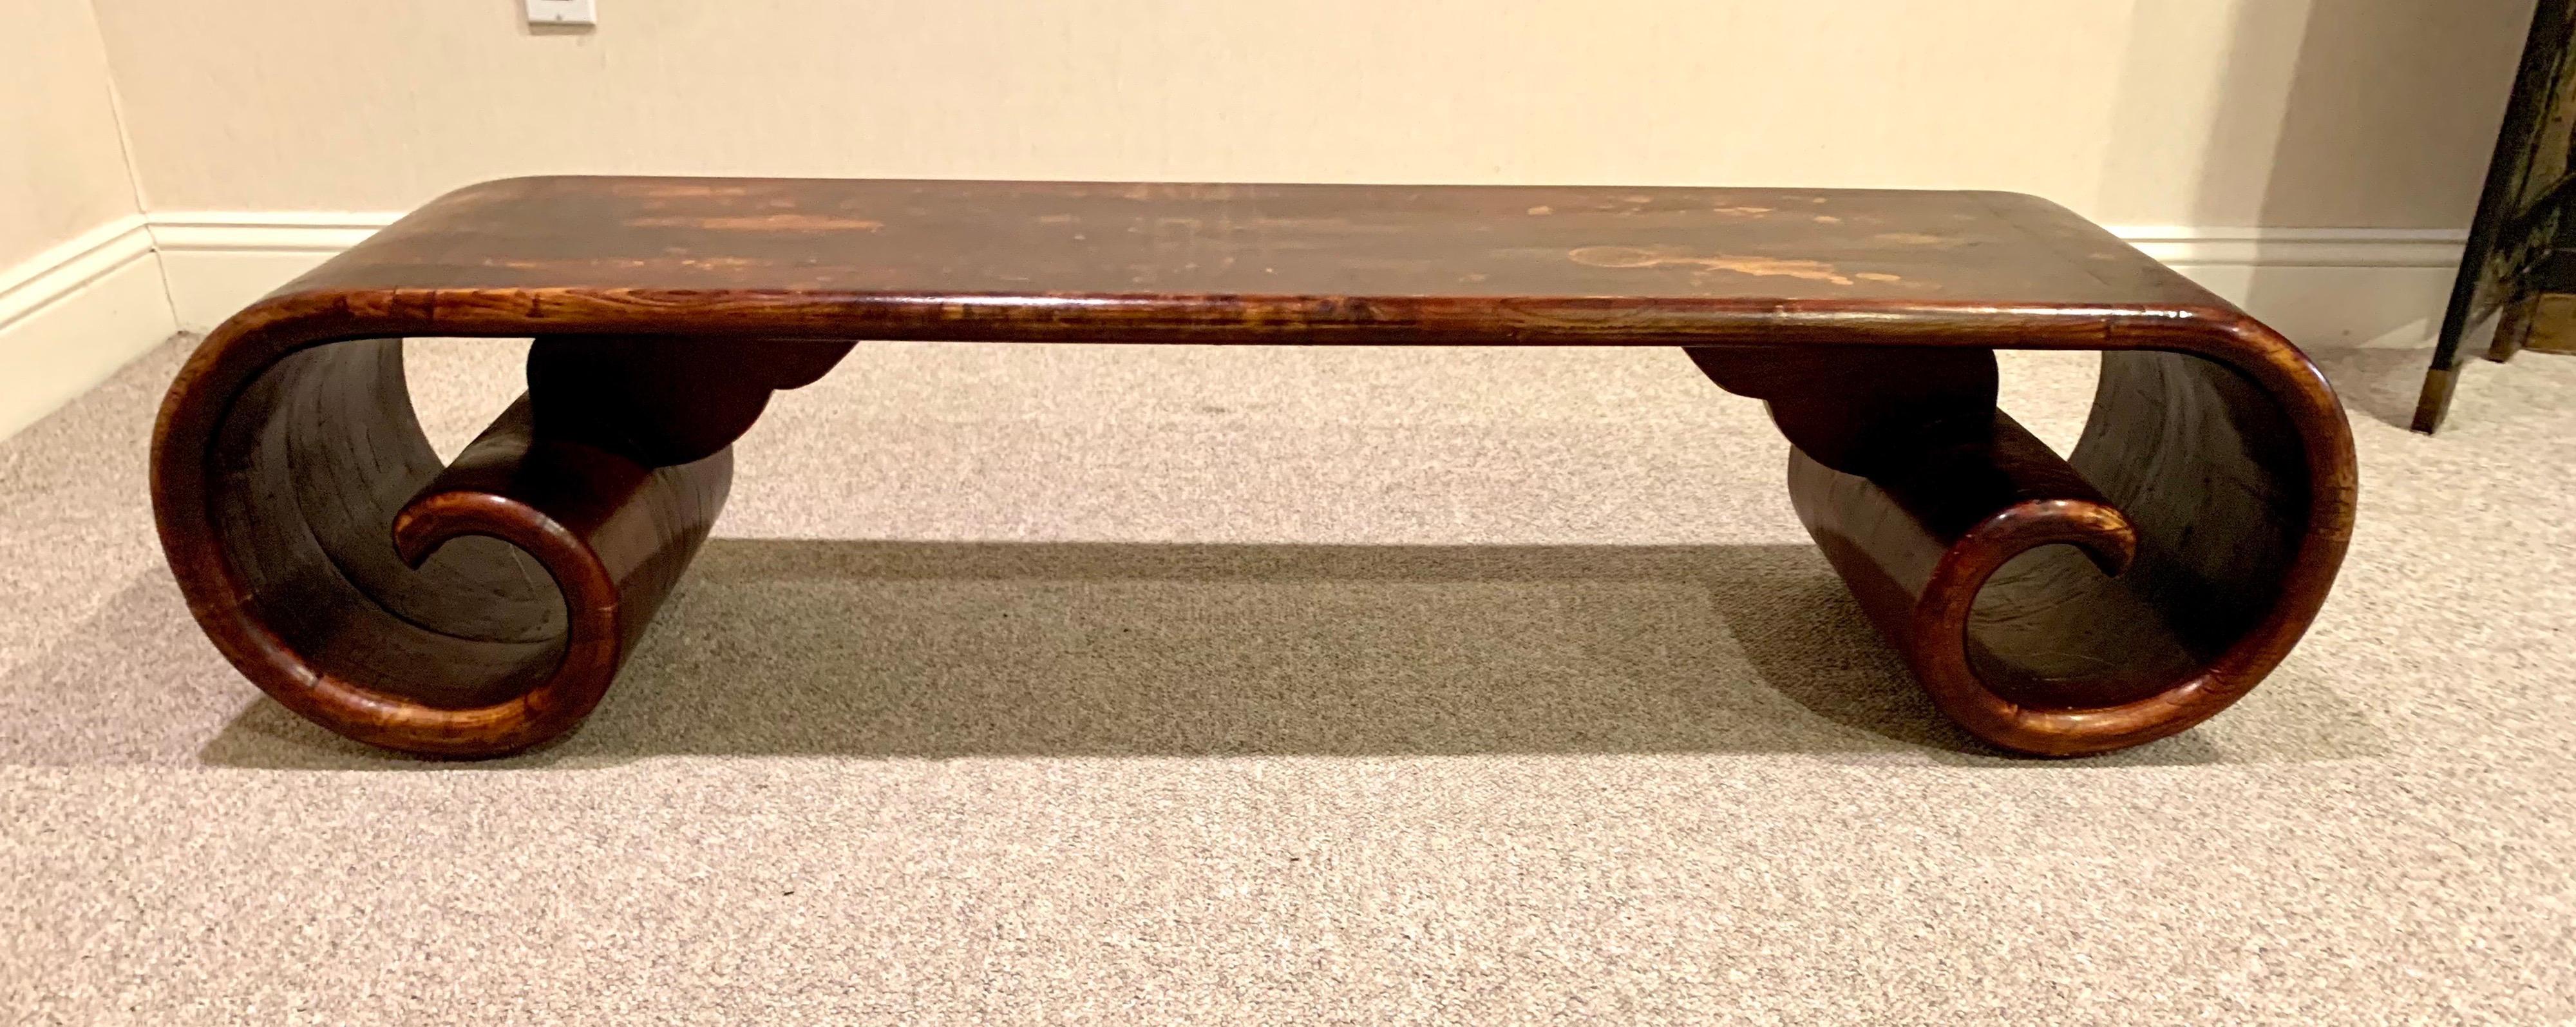 Chinese Export Antique Chinese Elmwood Scholars Table Bench